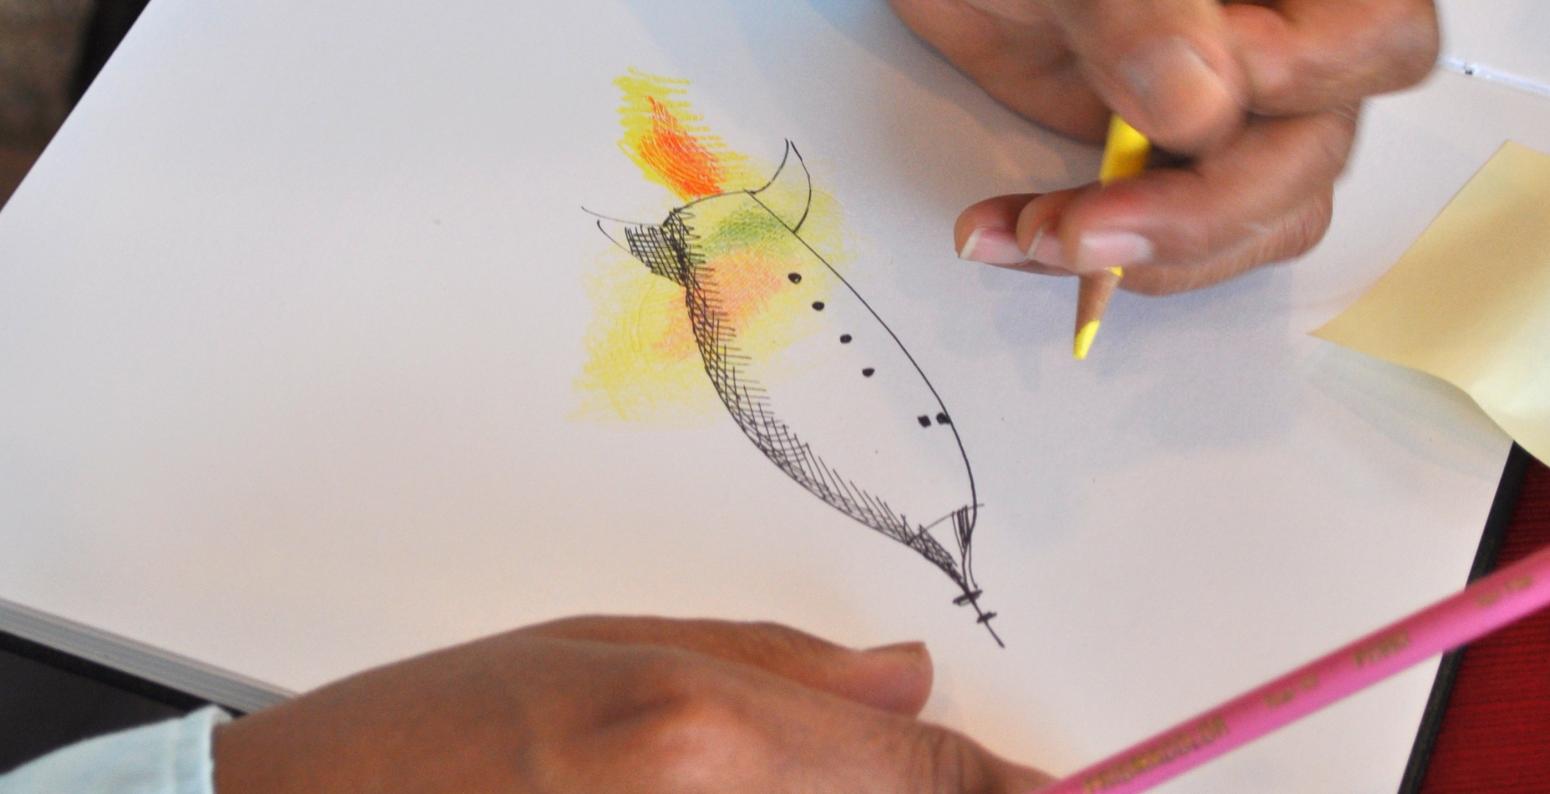 Author/illustrator Raúl Colón drawing a rocketship using colored pencils and a Sharpie.